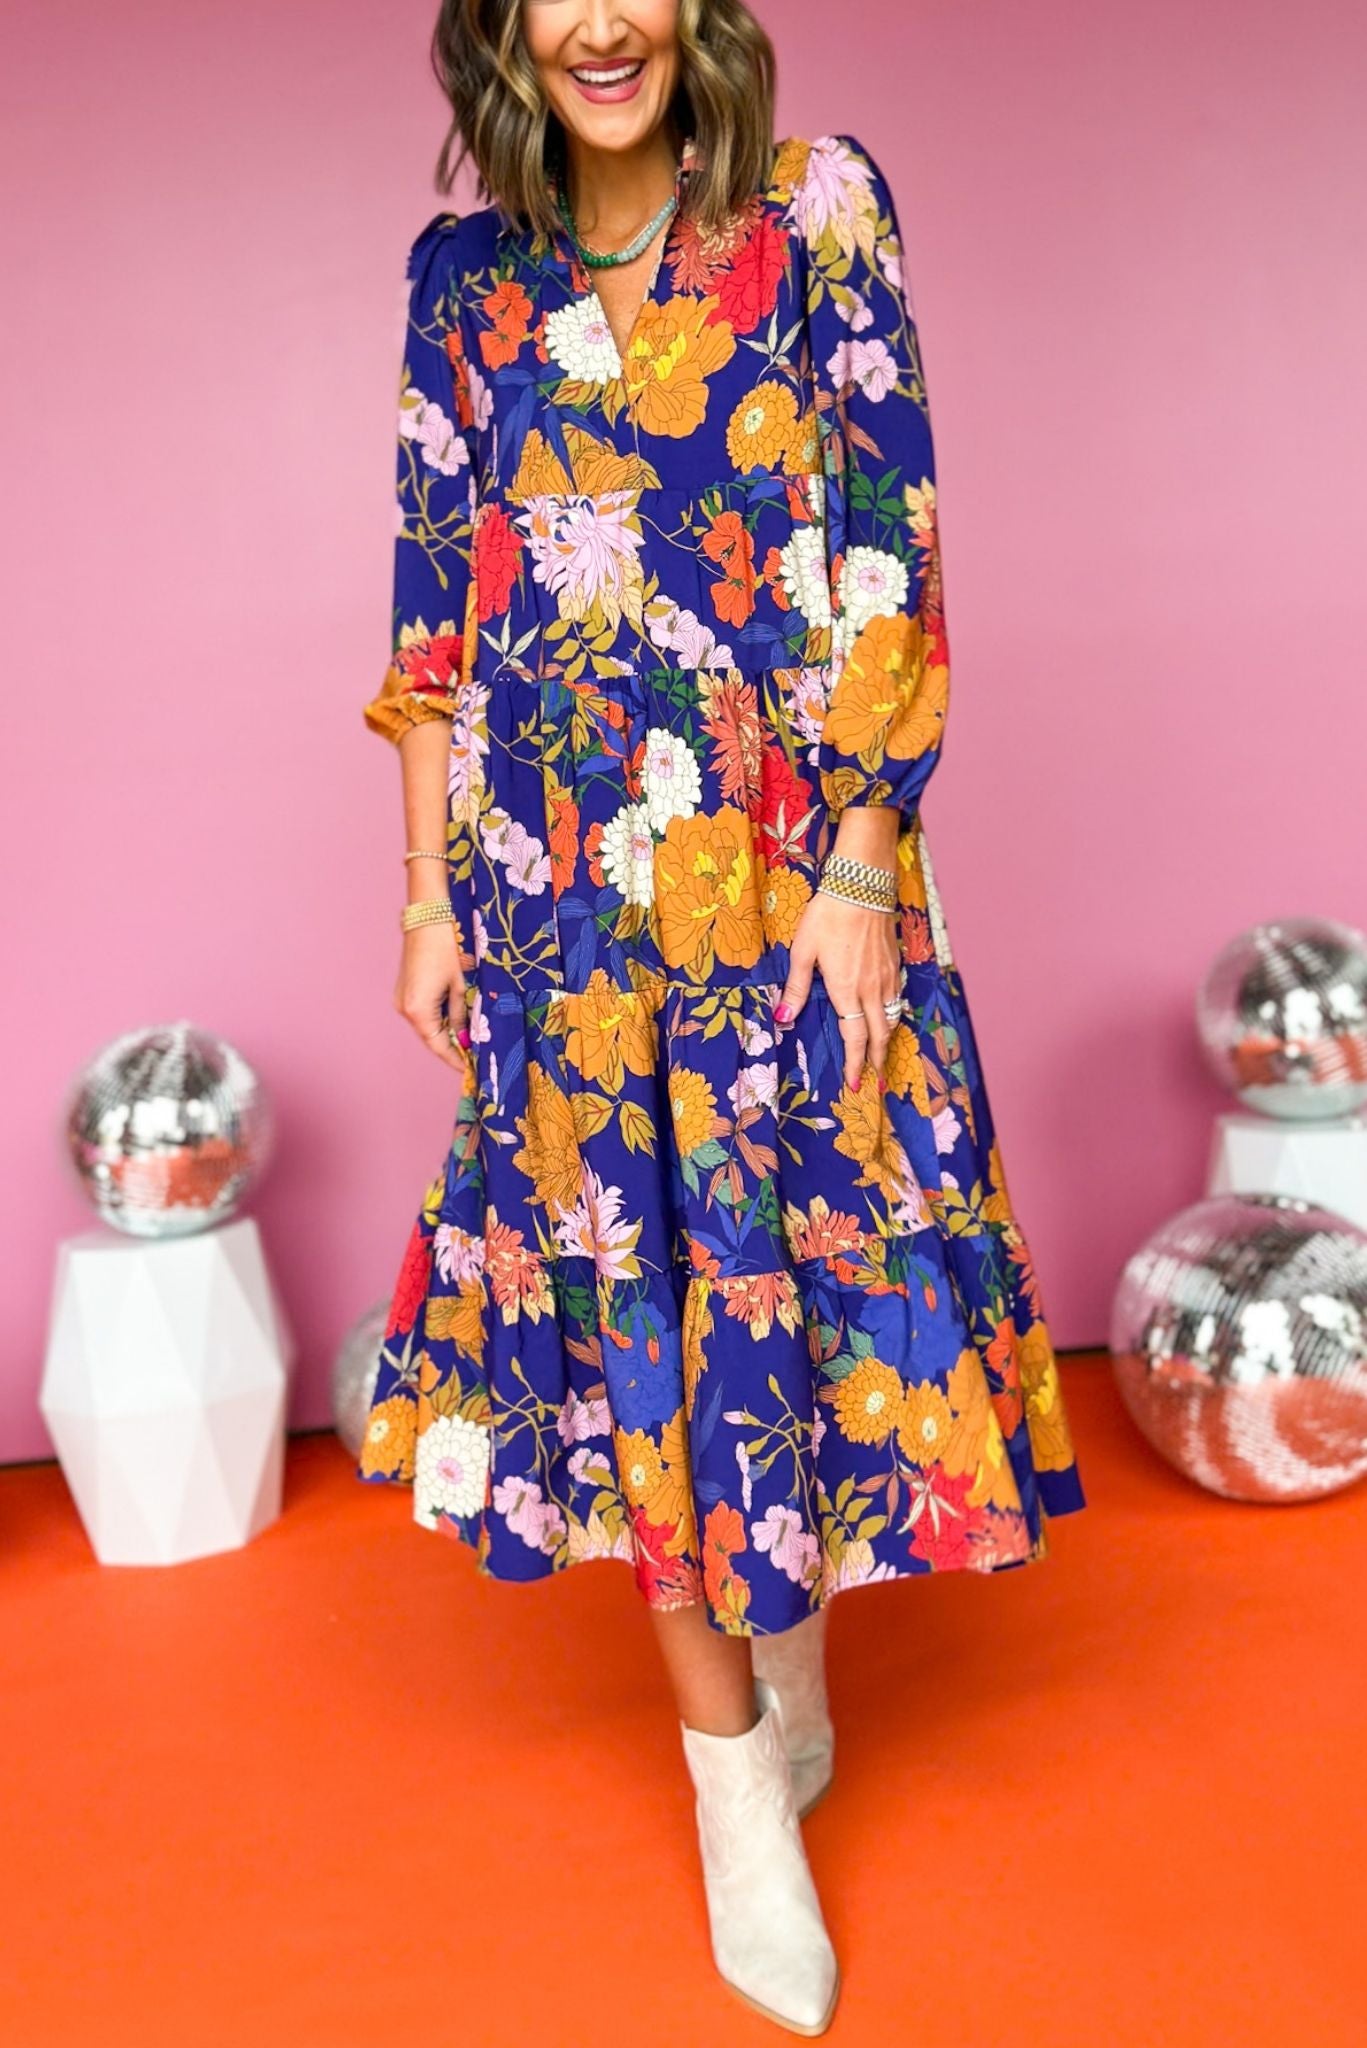 SSYS The Emery Midi Dress In Navy Floral Print, ssys the label, must have dress, printed dress, church dress, elevated dress, midi dress, mom style, spring style, elevated style, shop style your senses by mallory fitzsimmons